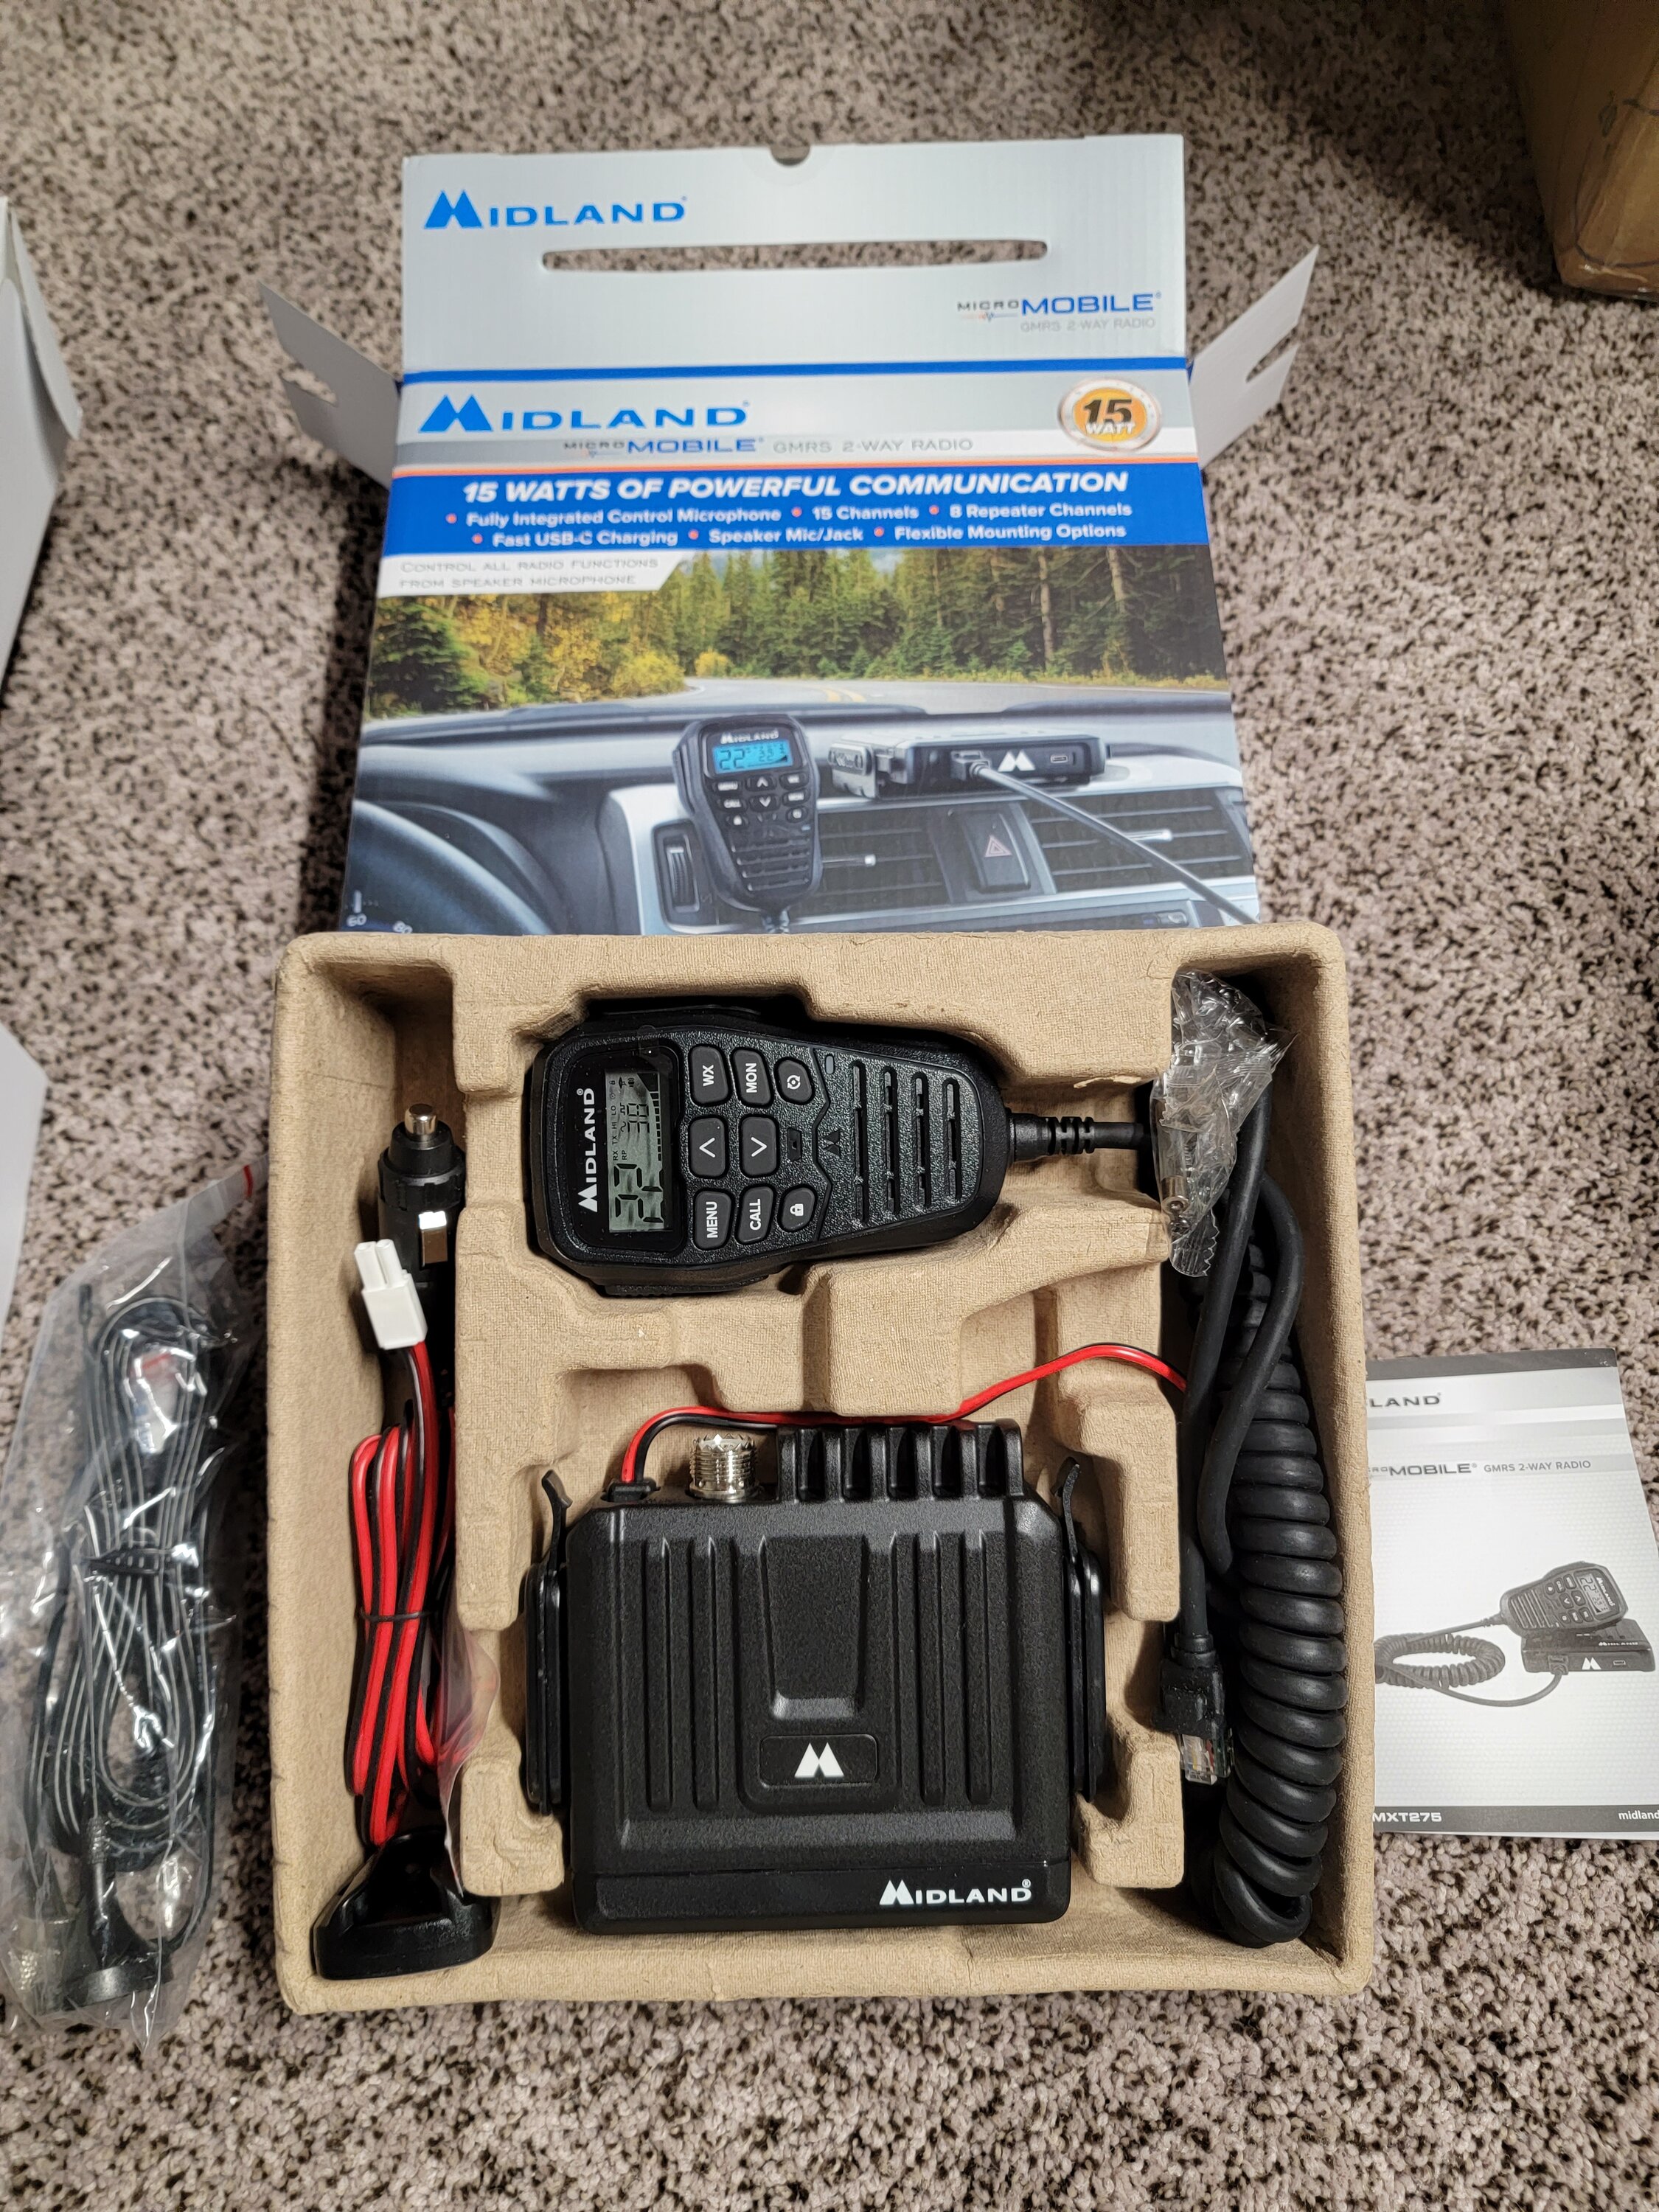 Ford Bronco 2 brand new, never installed GMRS Midland radios for sale. 20220806_141057